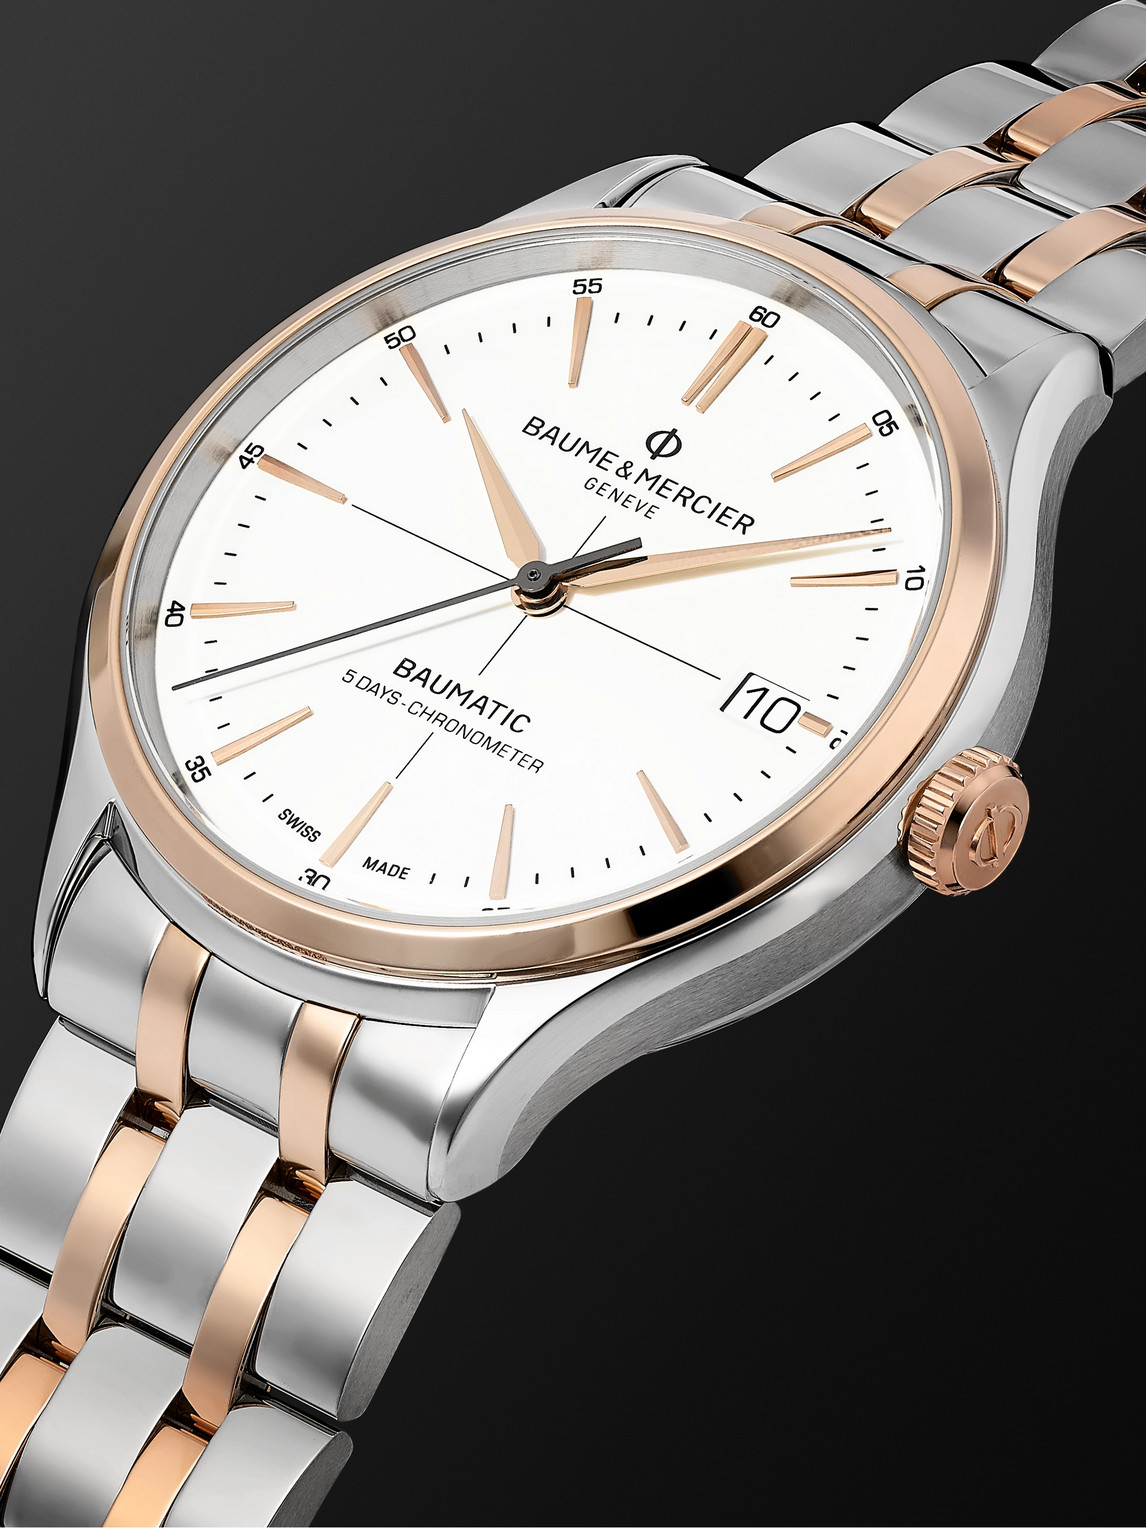 Shop Baume & Mercier Clifton Baumatic Automatic Chronometer 40mm Stainless Steel And 18-karat Rose Gold-capped Watch, Ref In Silver